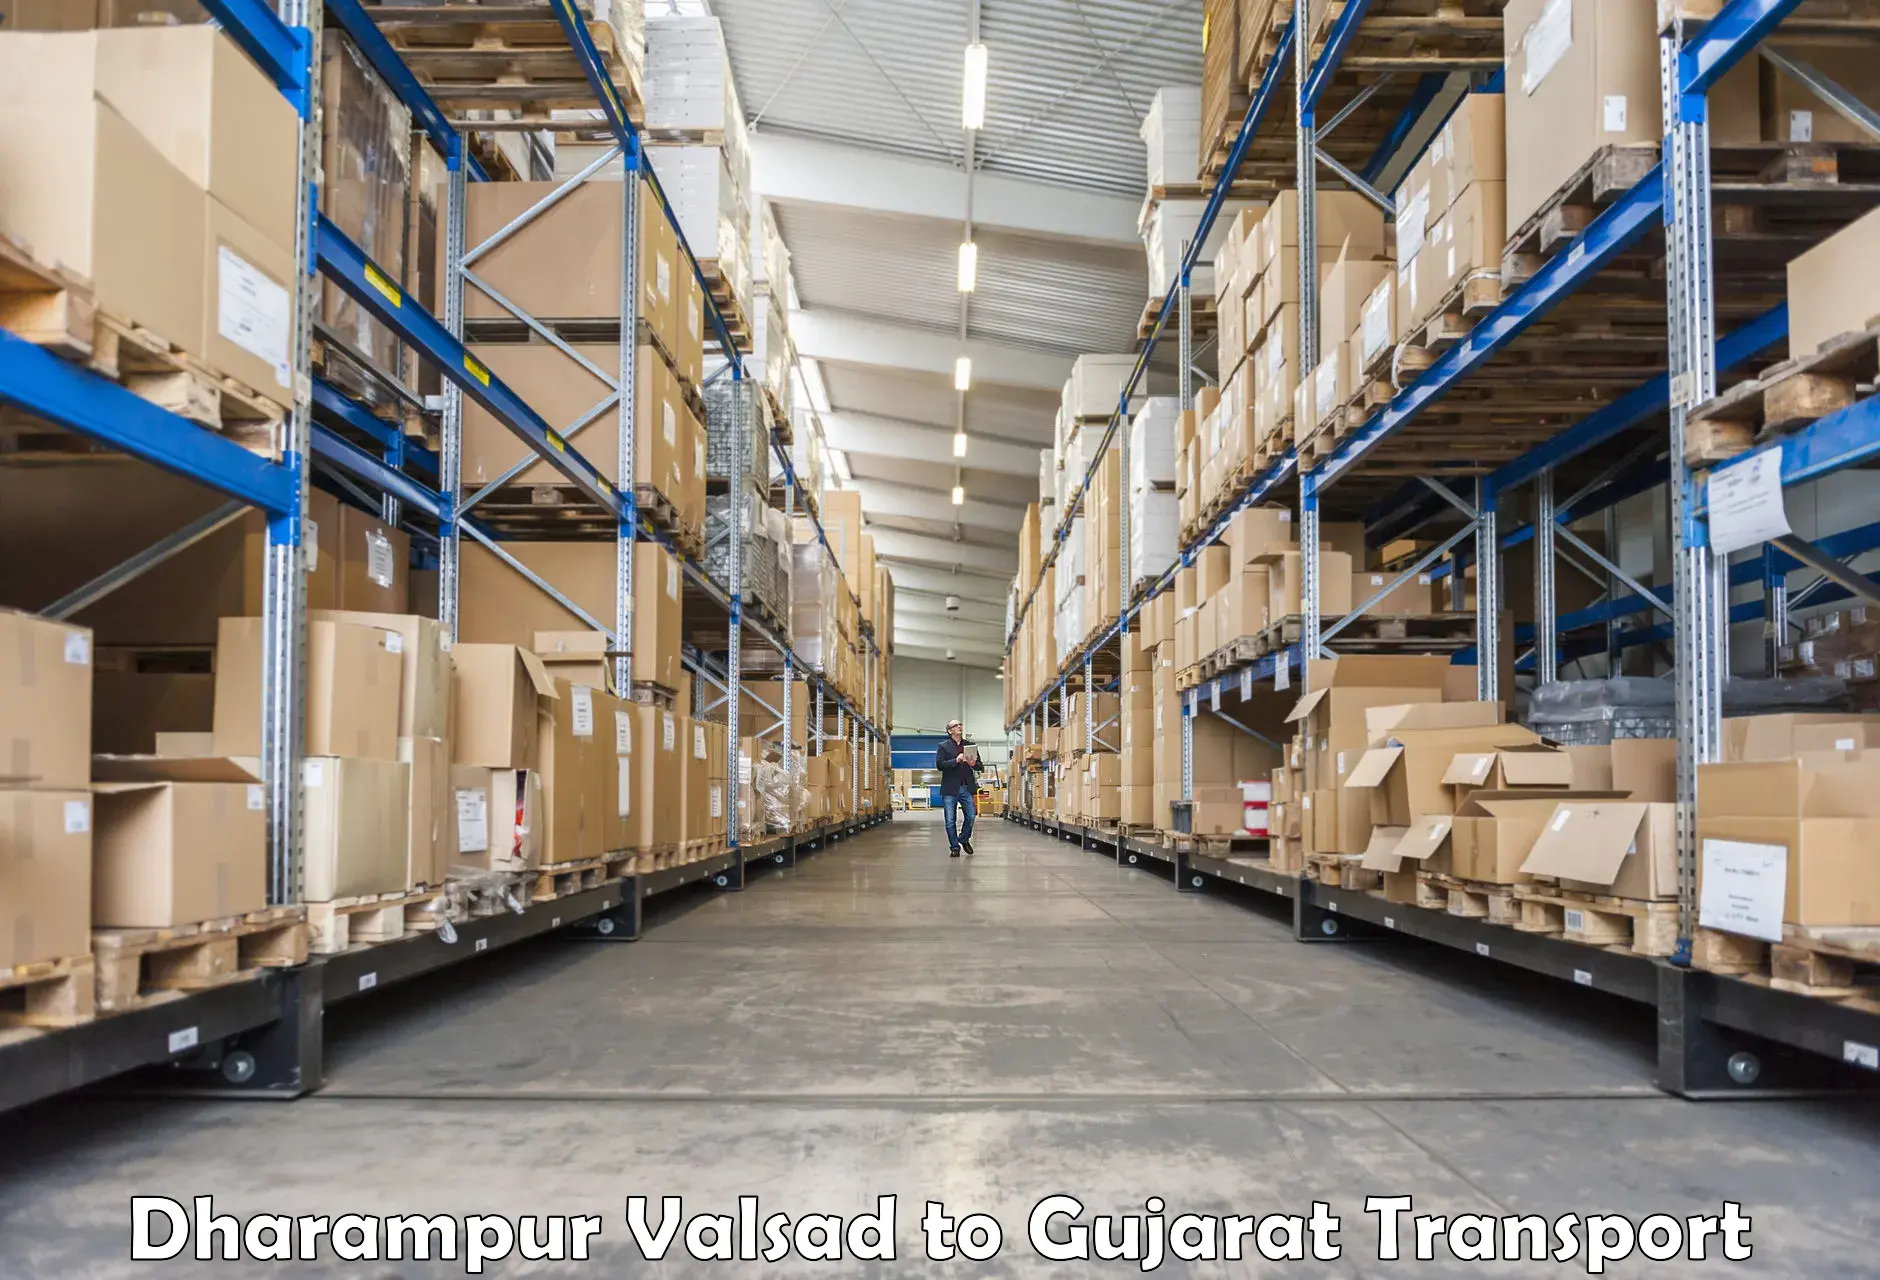 Air freight transport services in Dharampur Valsad to Dharampur Valsad